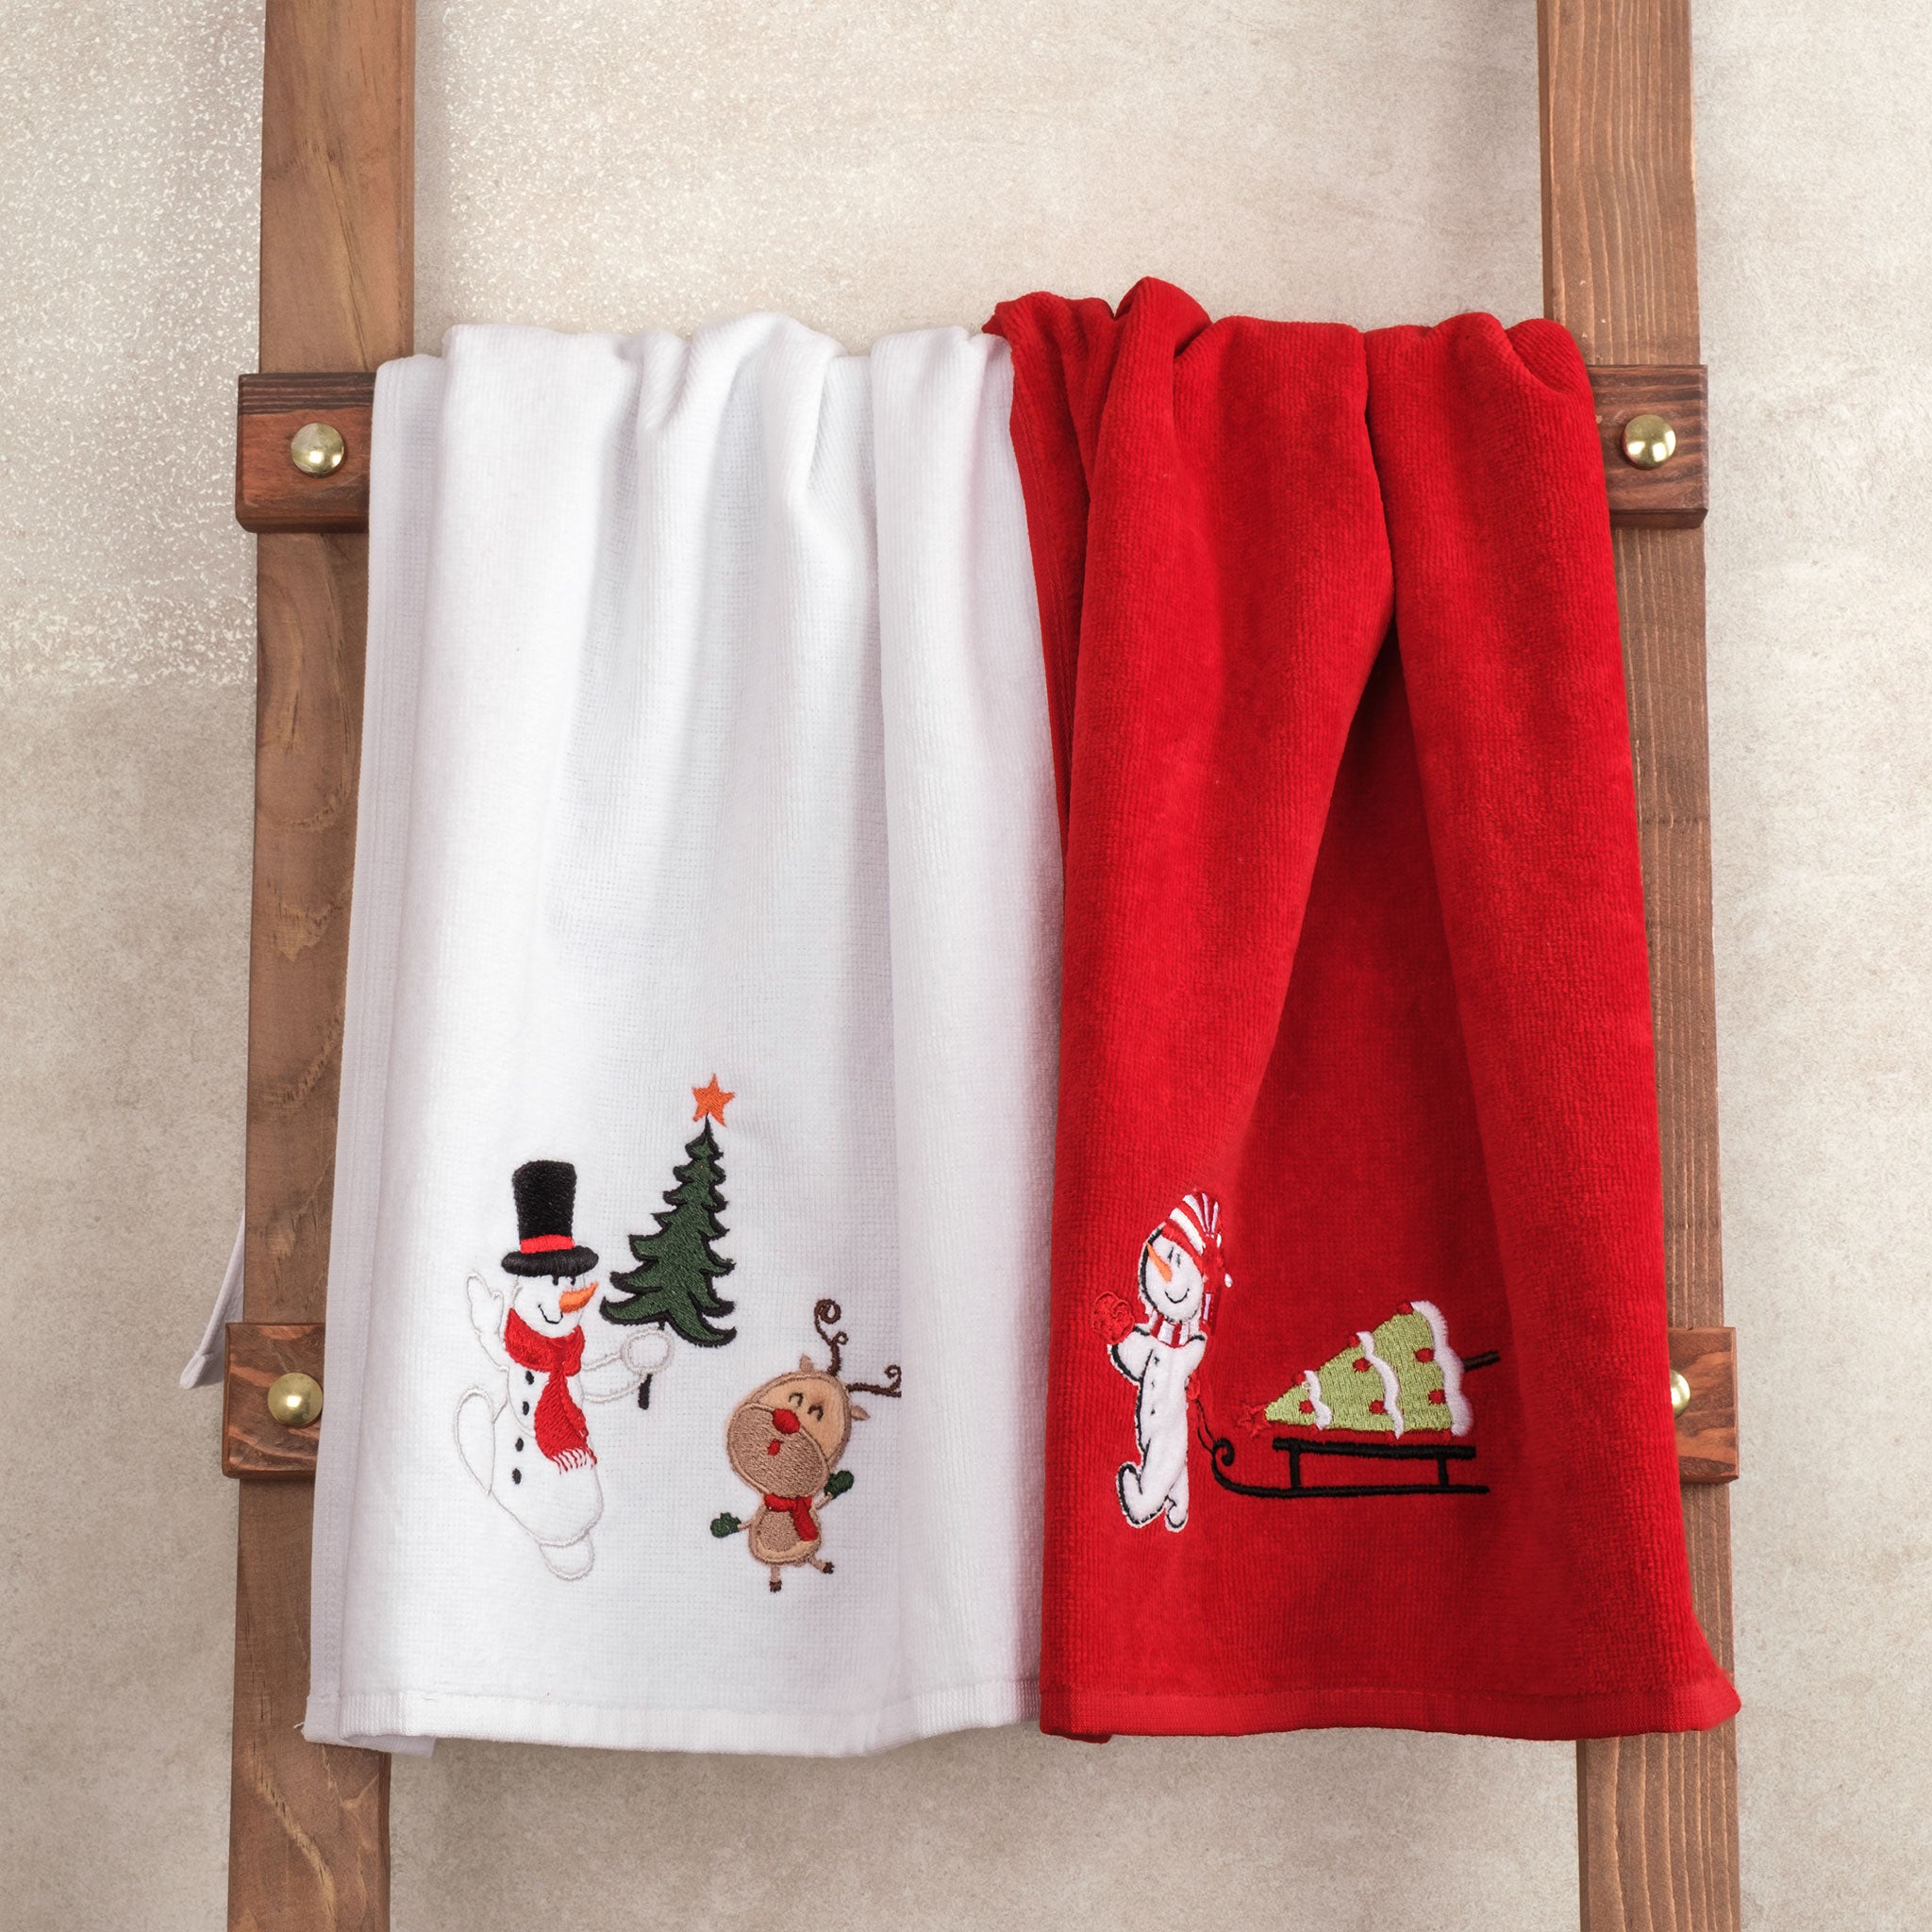 American Soft Linen - Christmas Towels 2  Packed Embroidered Towels for Decor Xmas - 60 Set Case Pack - Snowmen - 1